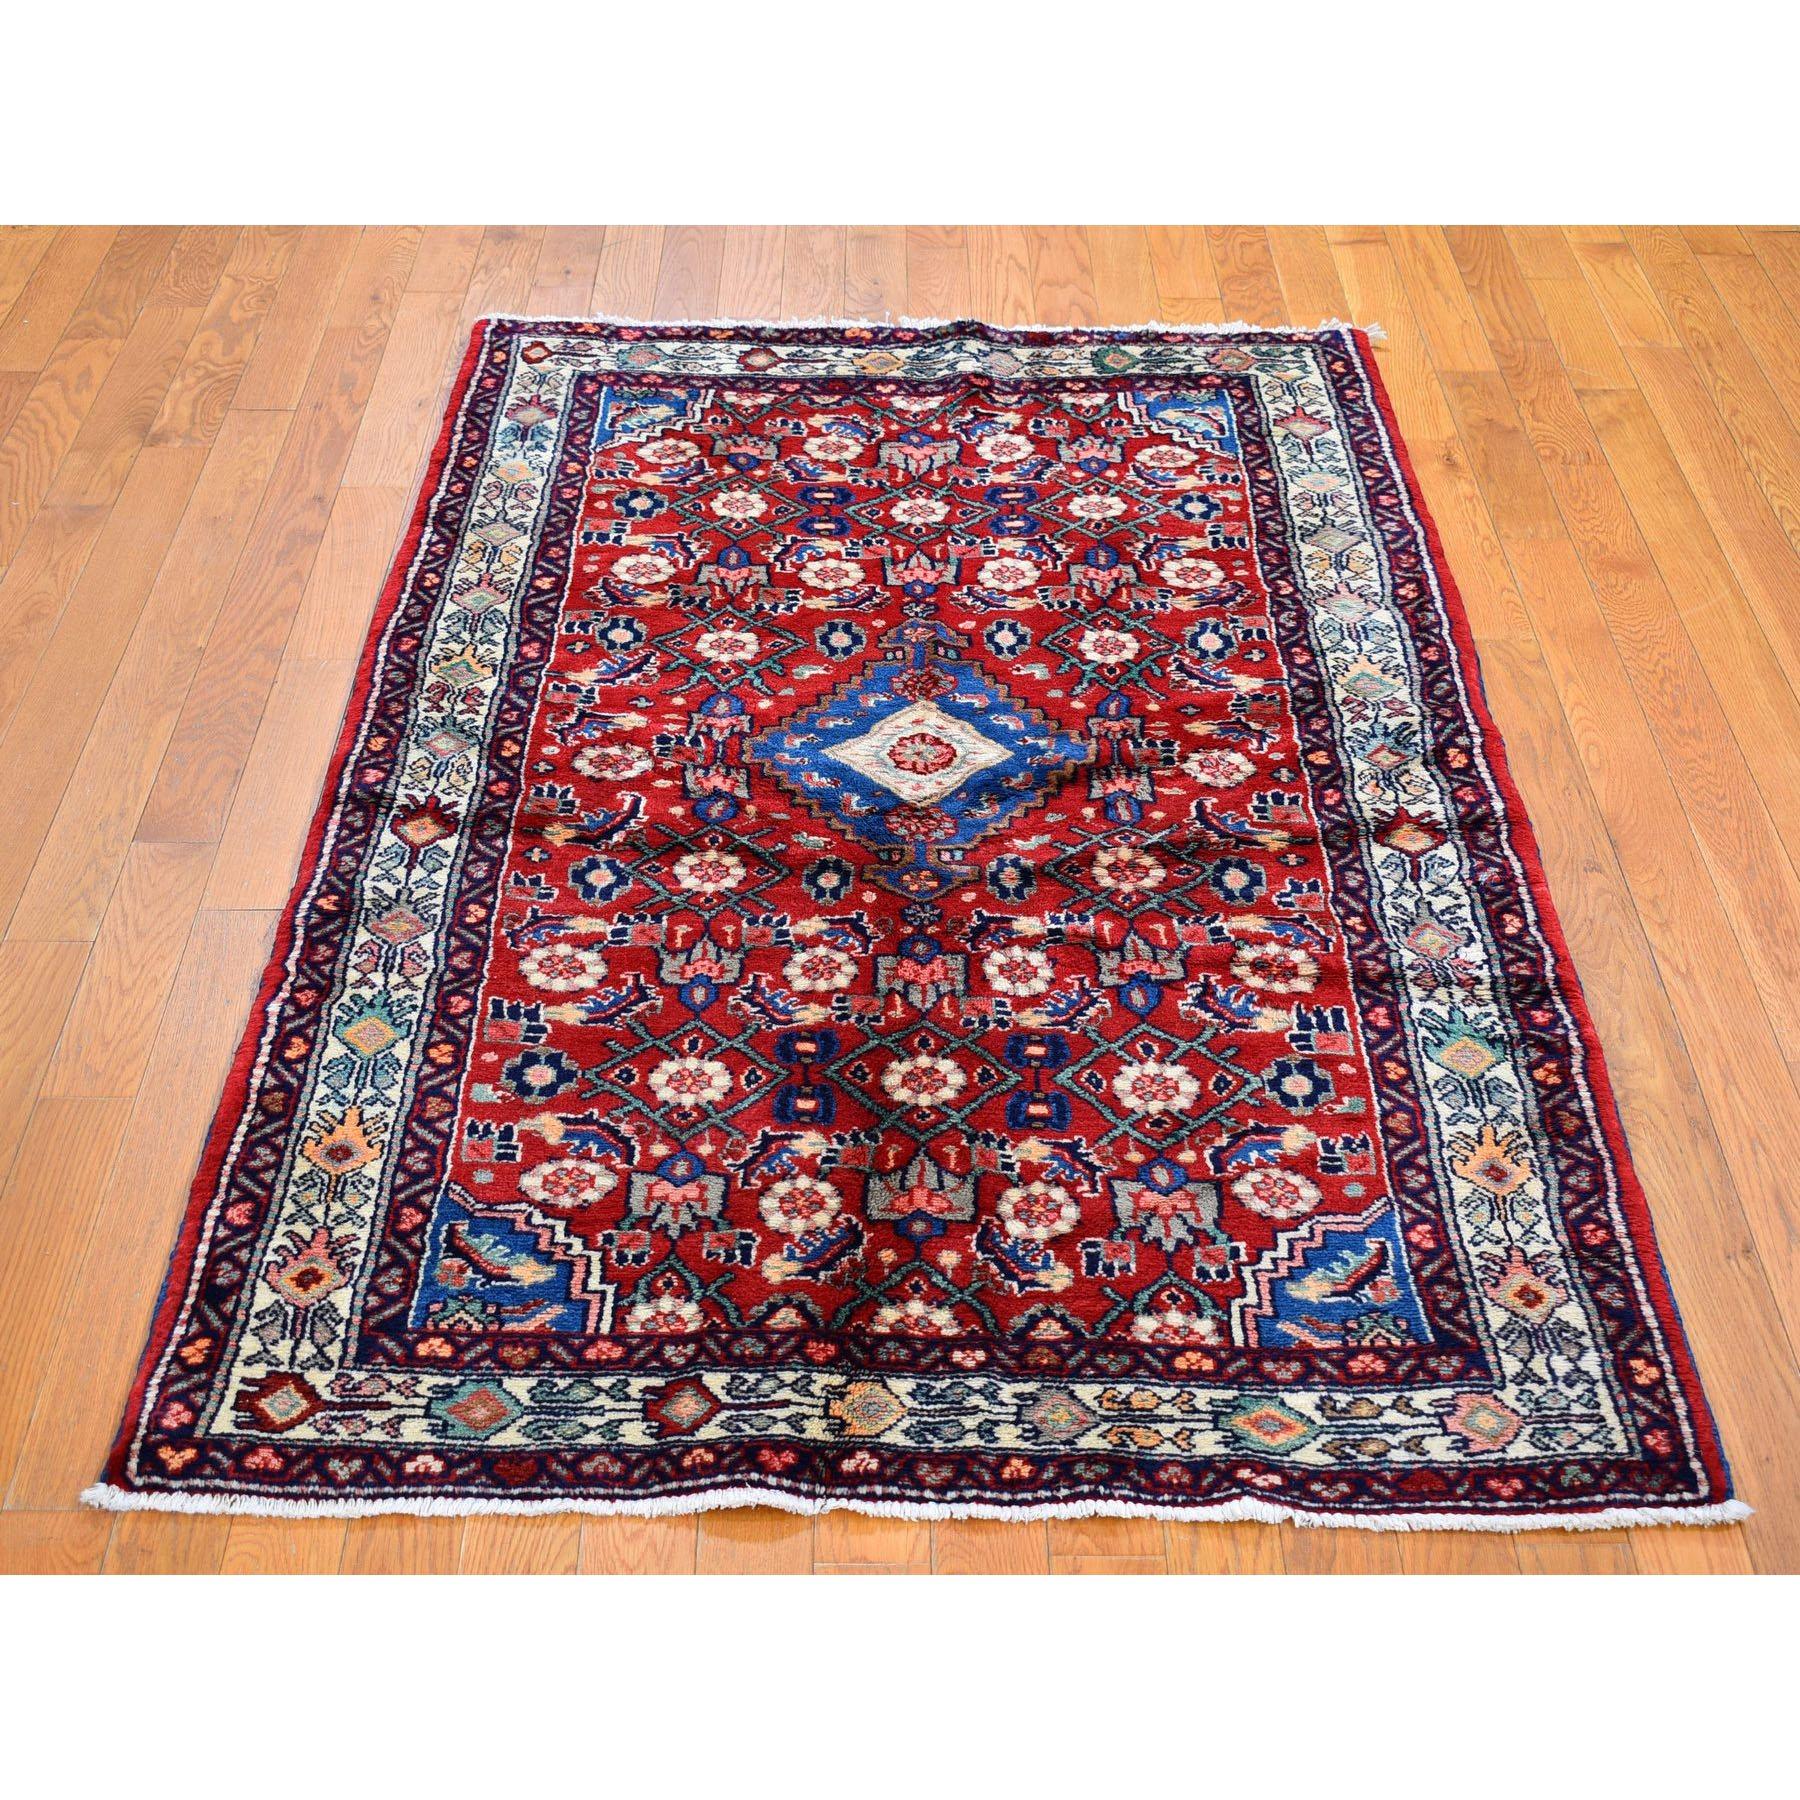 This fabulous hand-knotted carpet has been created and designed for extra strength and durability. This rug has been handcrafted for weeks in the traditional method that is used to make
Exact Rug Size in Feet and Inches : 3'10